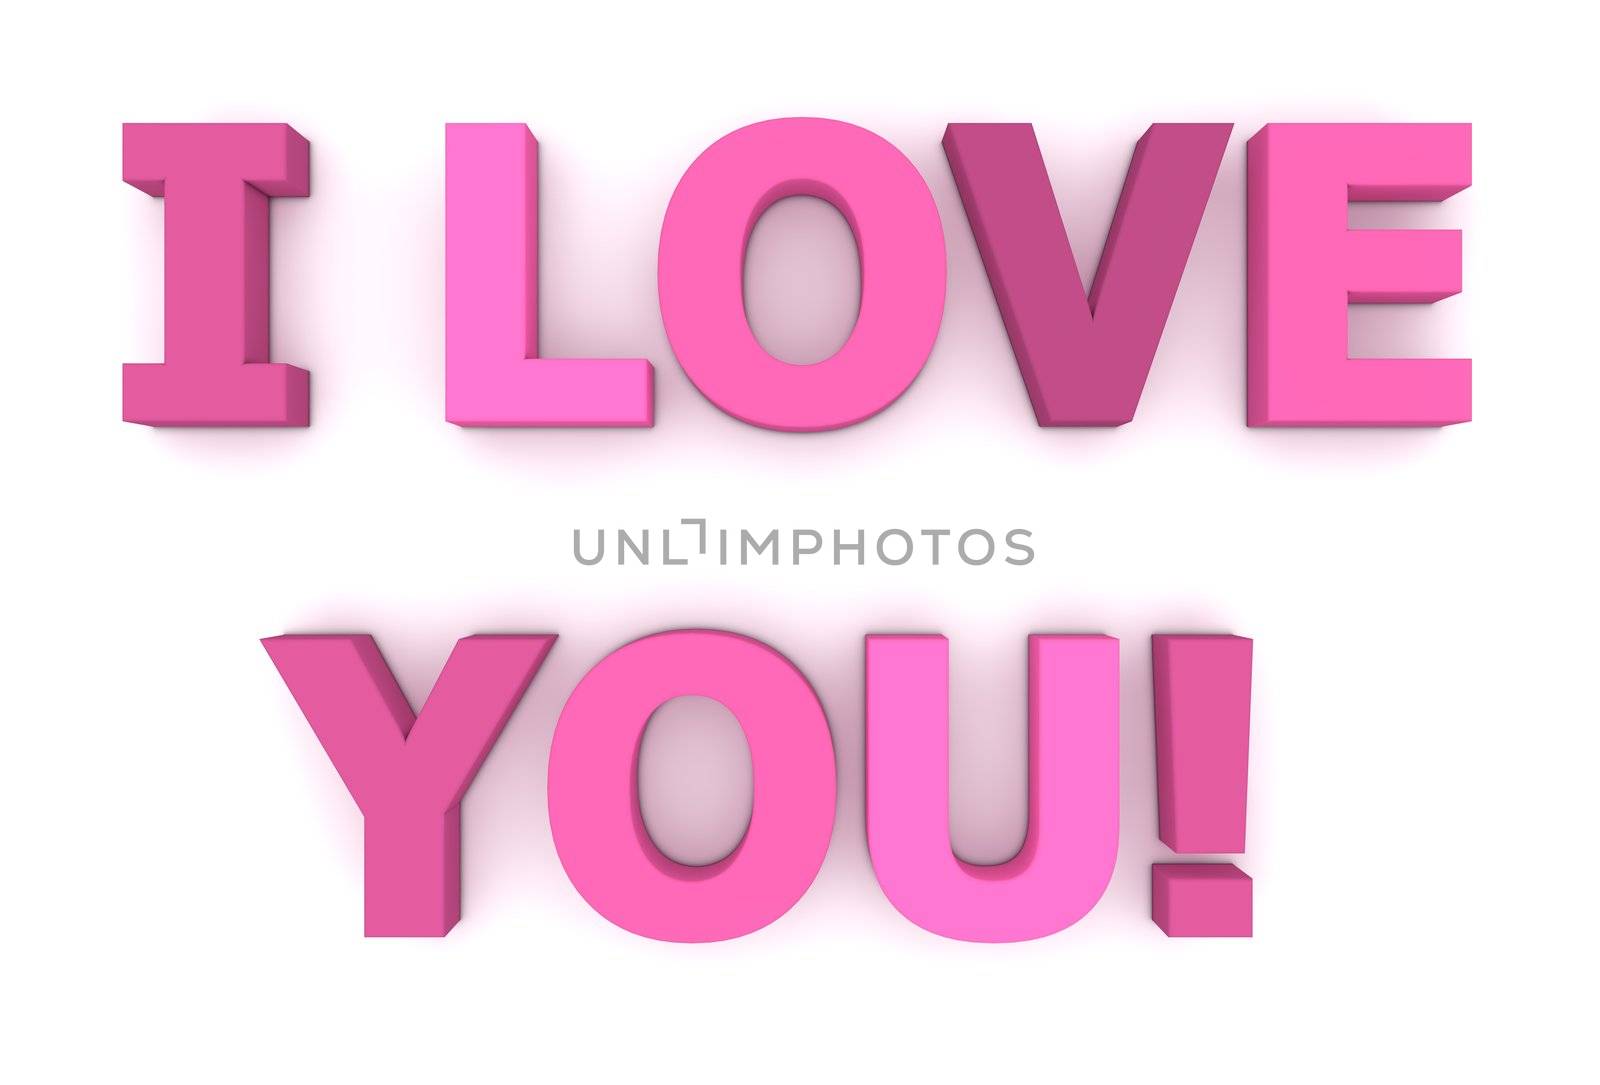 words I Love You! in different shades of pink and purple - two lines